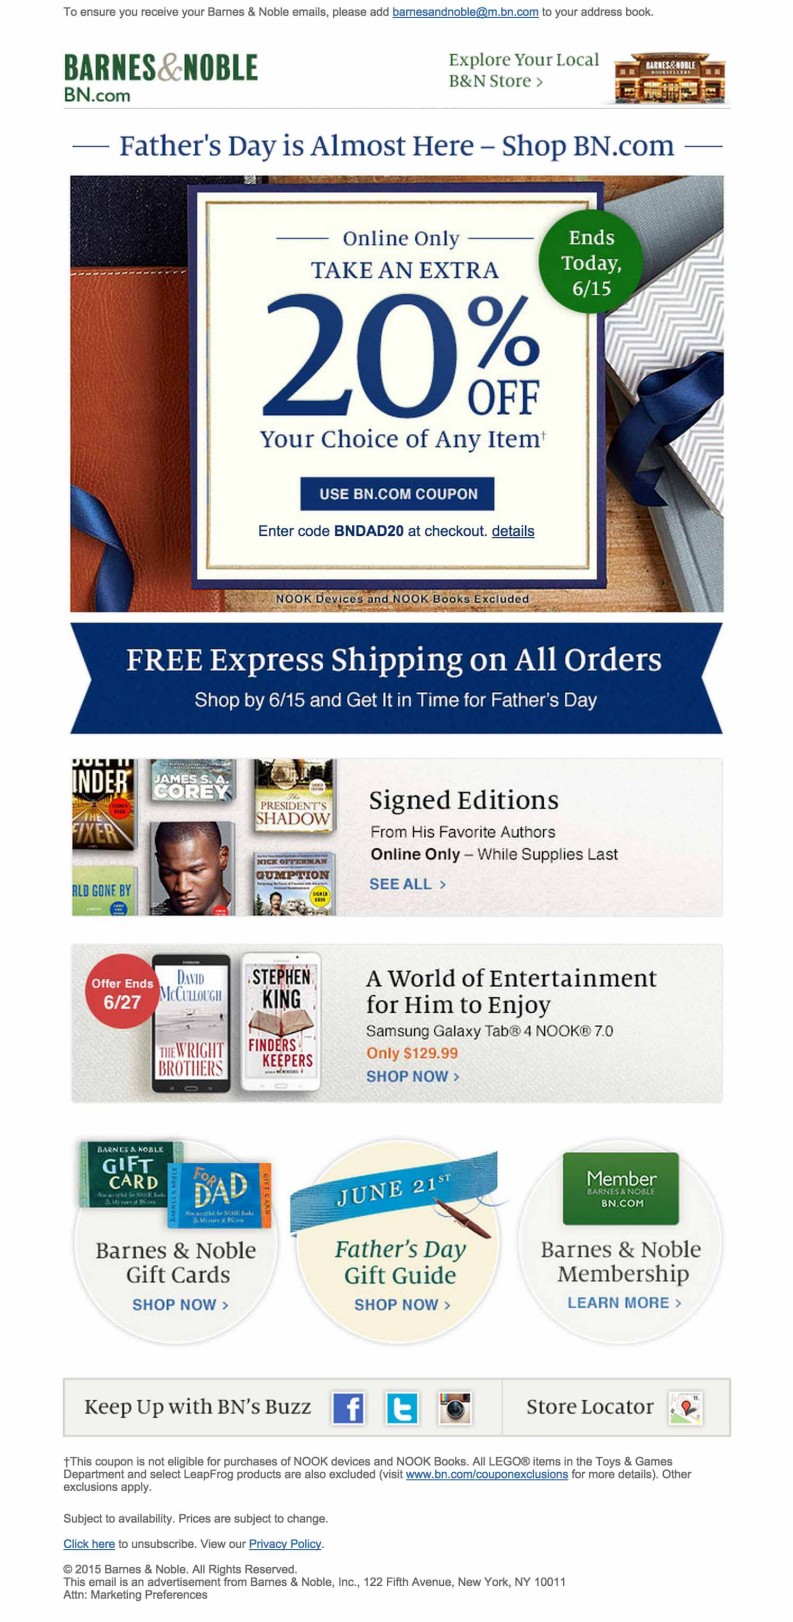 Barnes & Noble Fathers Day email